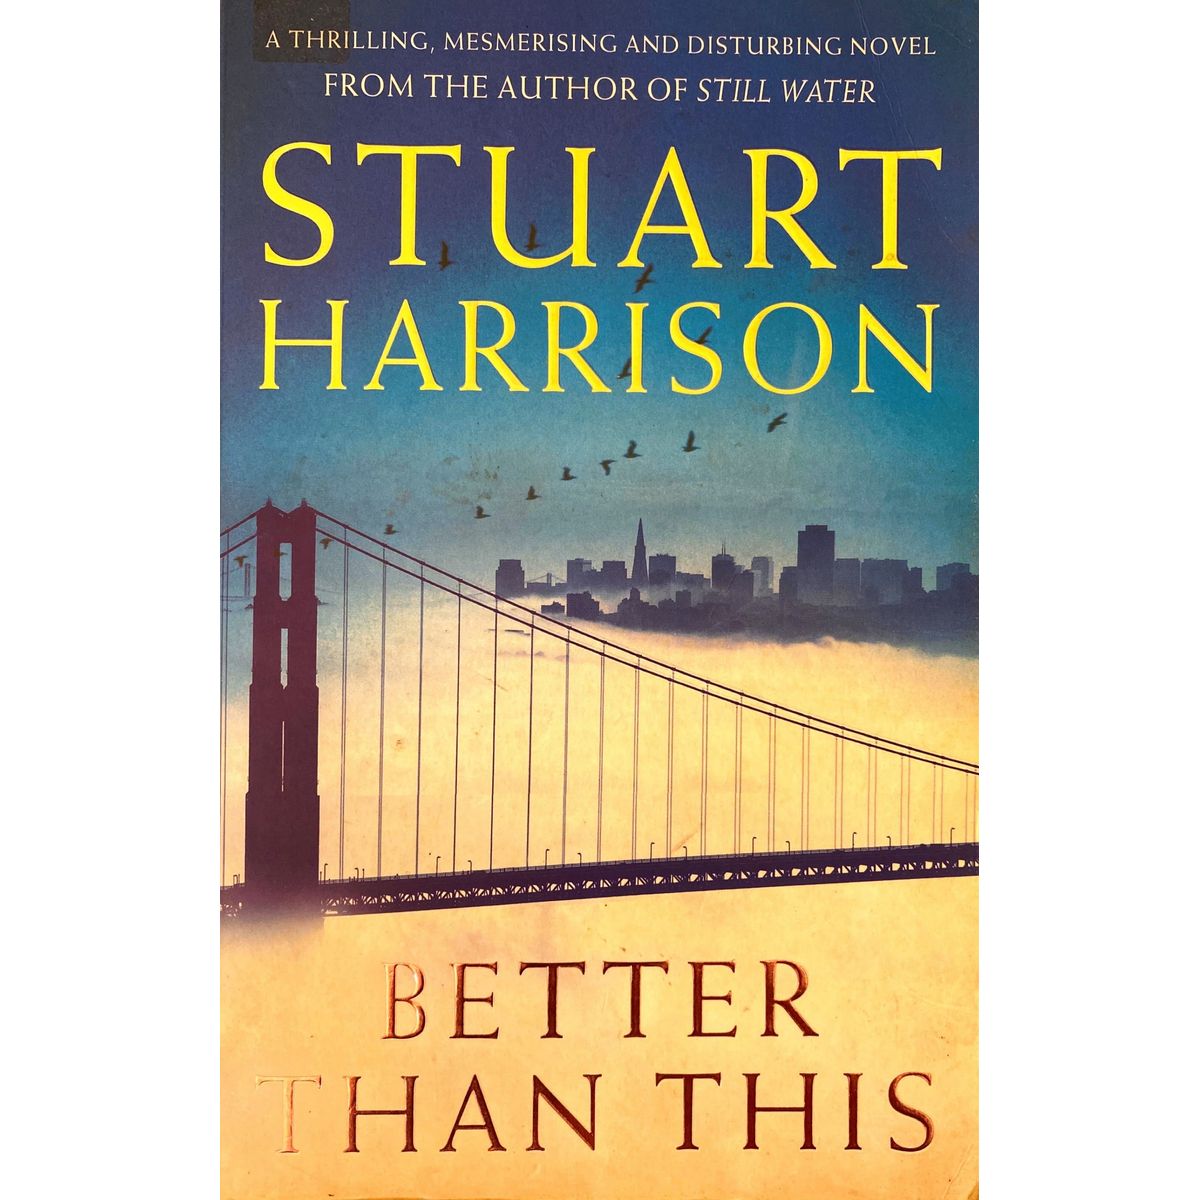 ISBN: 9780006514572 / 000651457X - Better Than This by Stuart Harrison [2002]